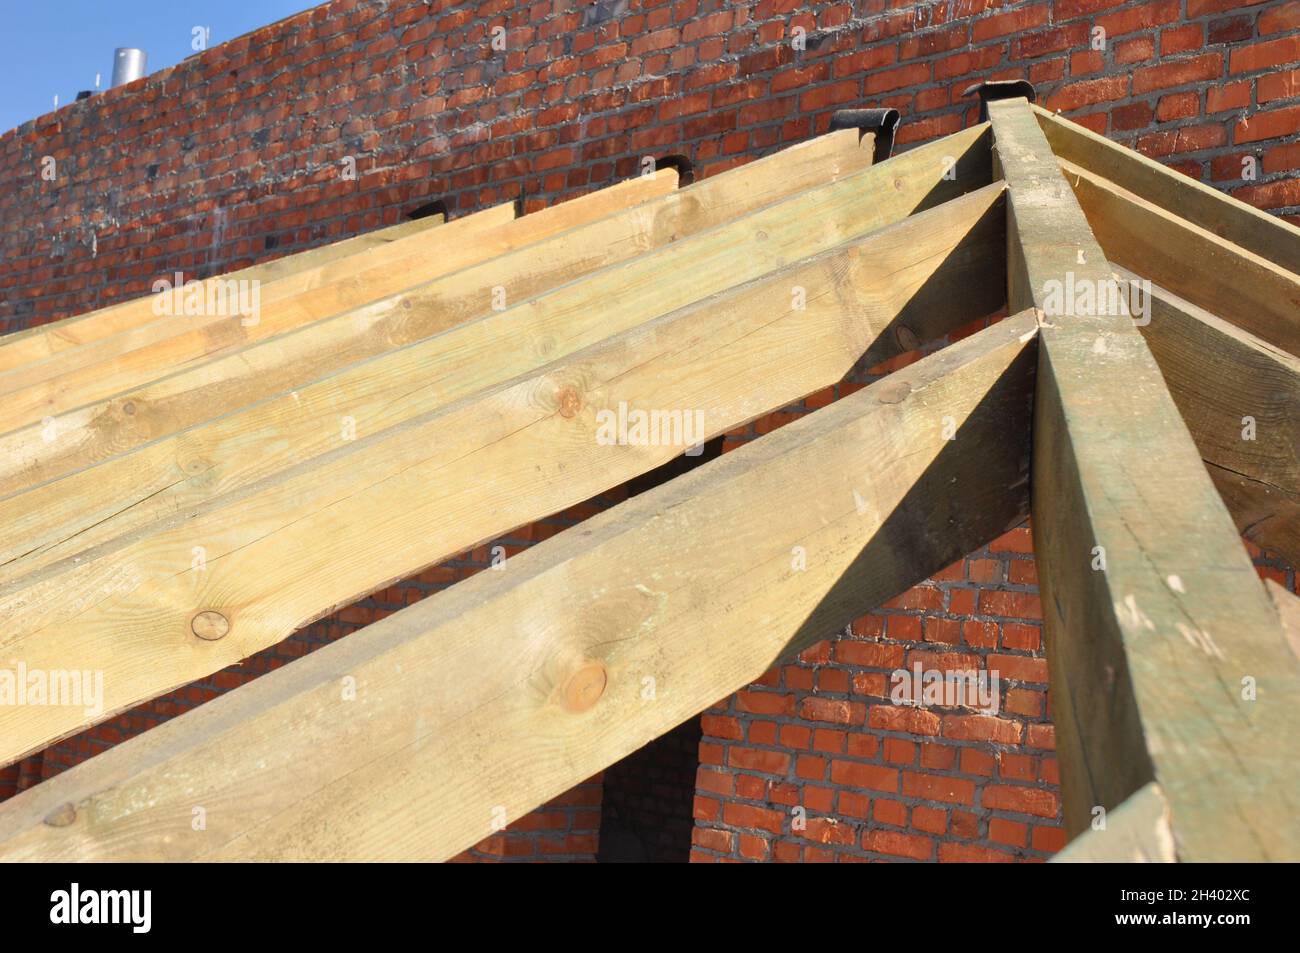 Wooden Roof Frame House Construction with Wooden Beams, Rafters, Trusses, Timber. Stock Photo